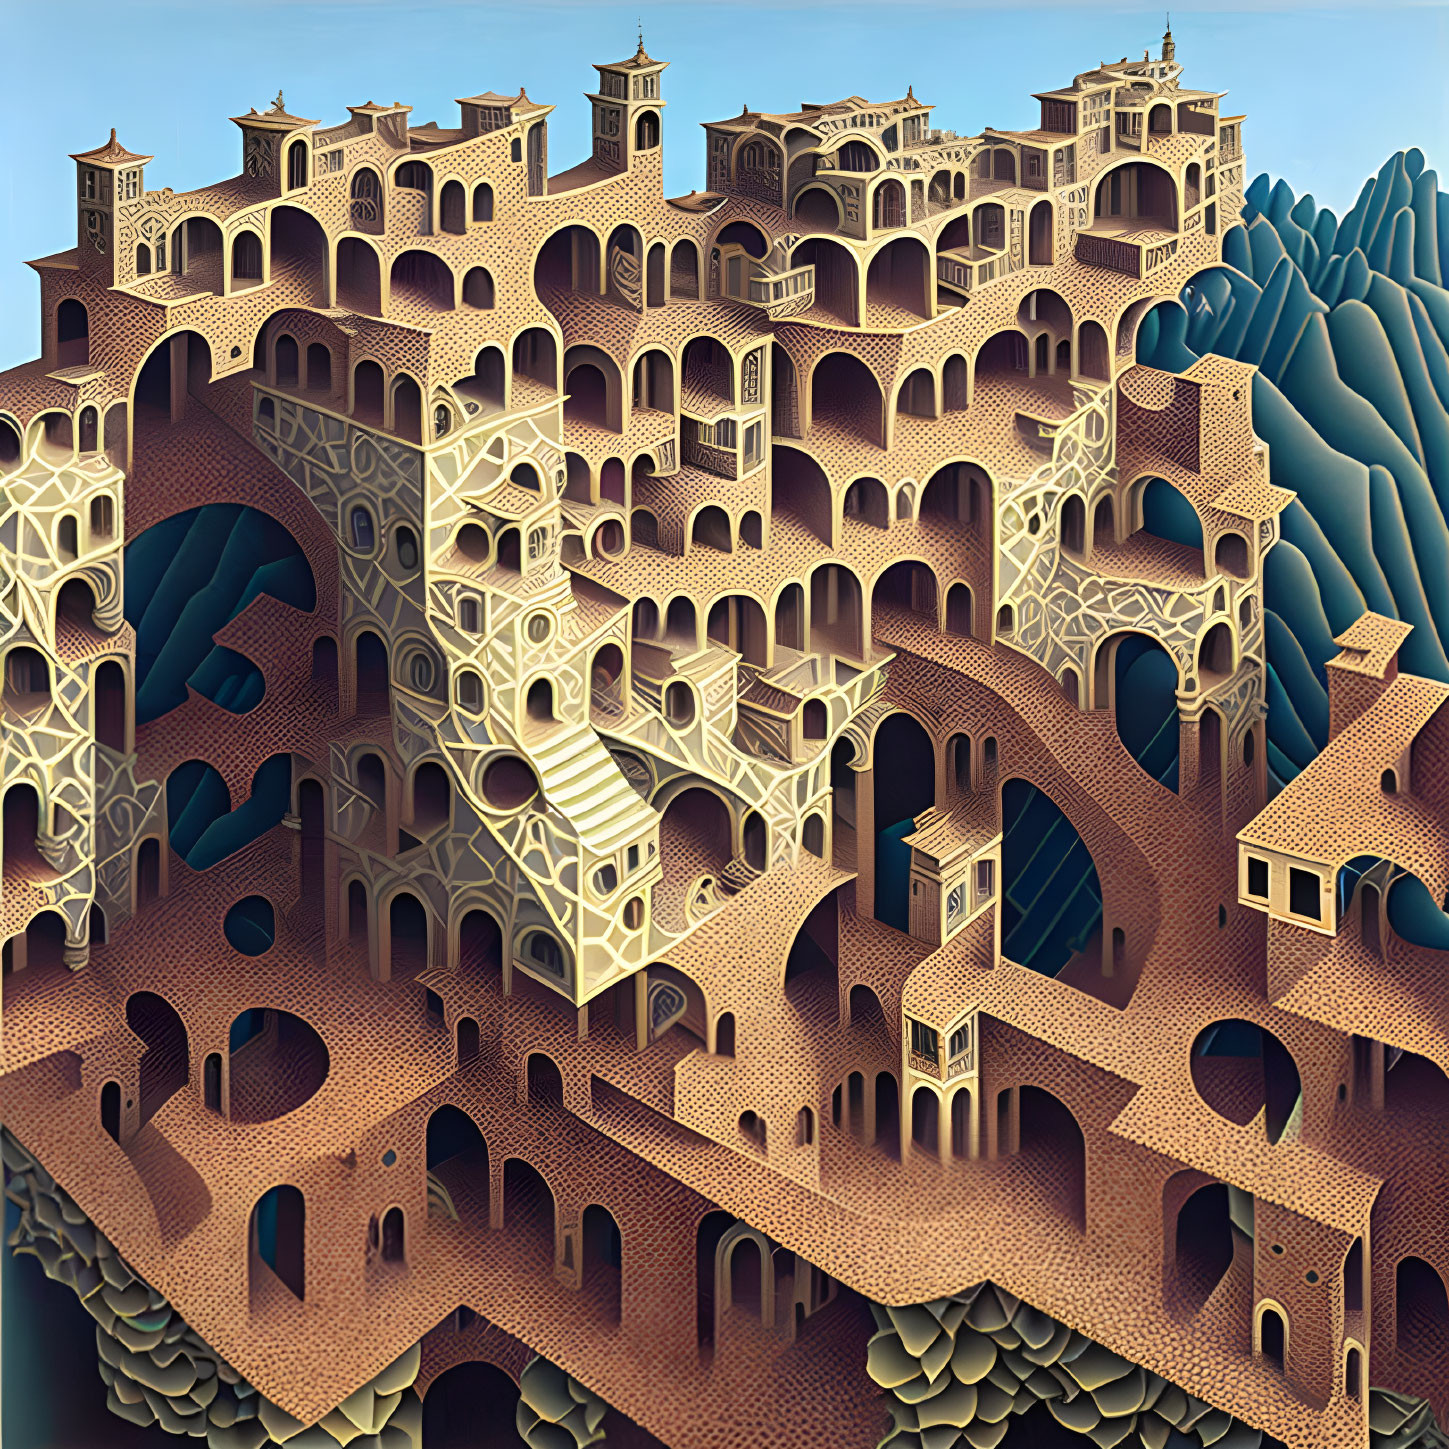 Intricate Escher-like illustration of impossible architecture